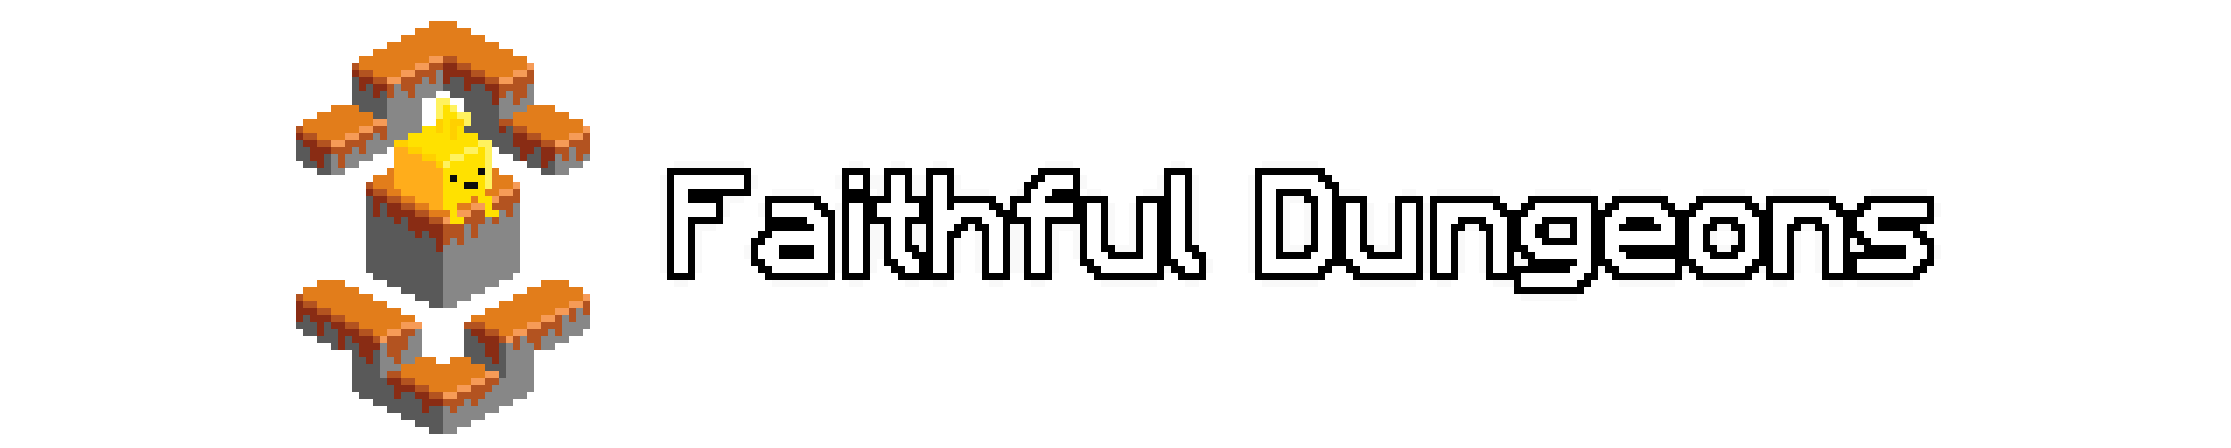 Faithful 32x: Dungeons [DISCONTINUED] Minecraft Texture Pack